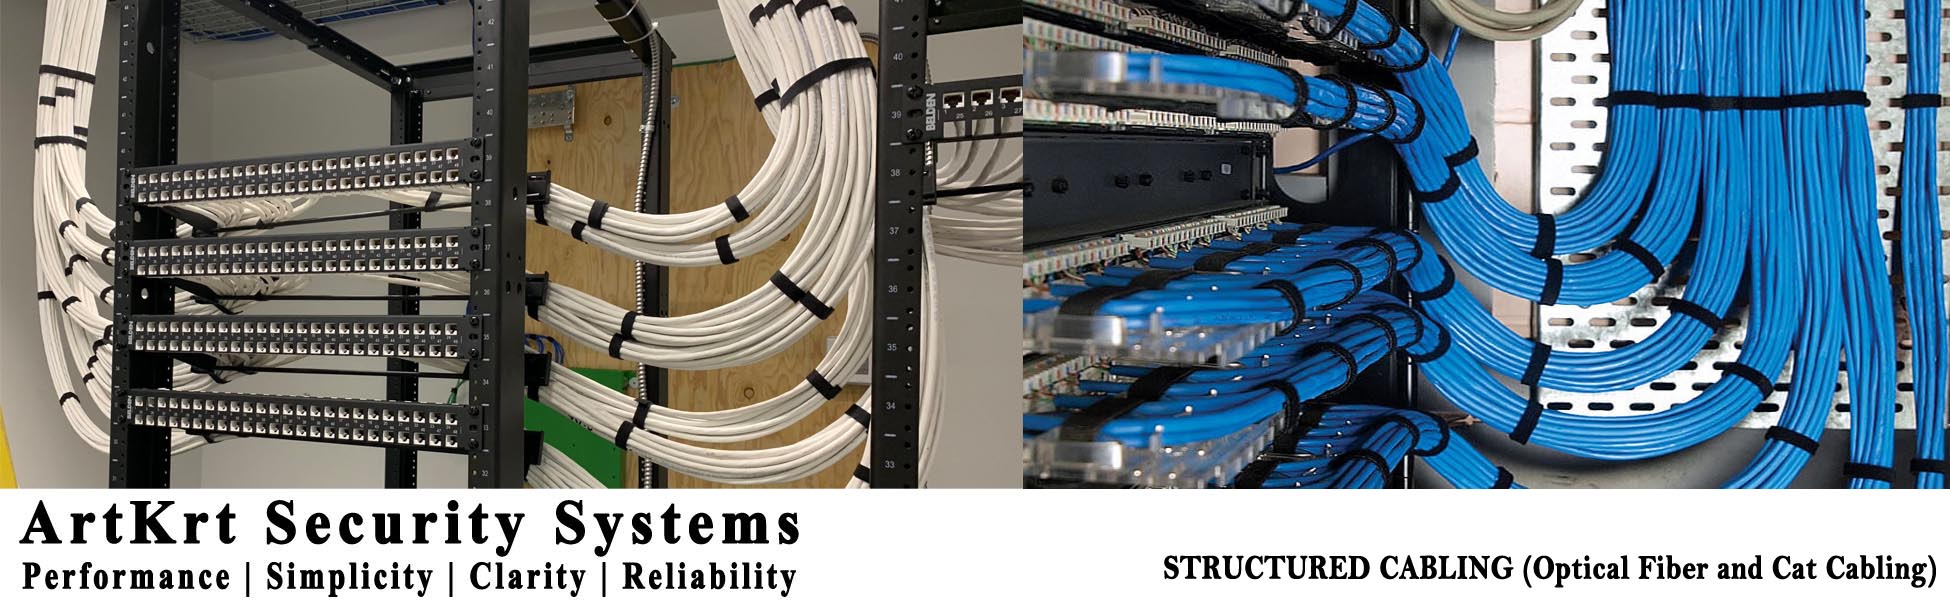 STRUCTURED CABLING (Optical Fiber Cable and Cat Cable)